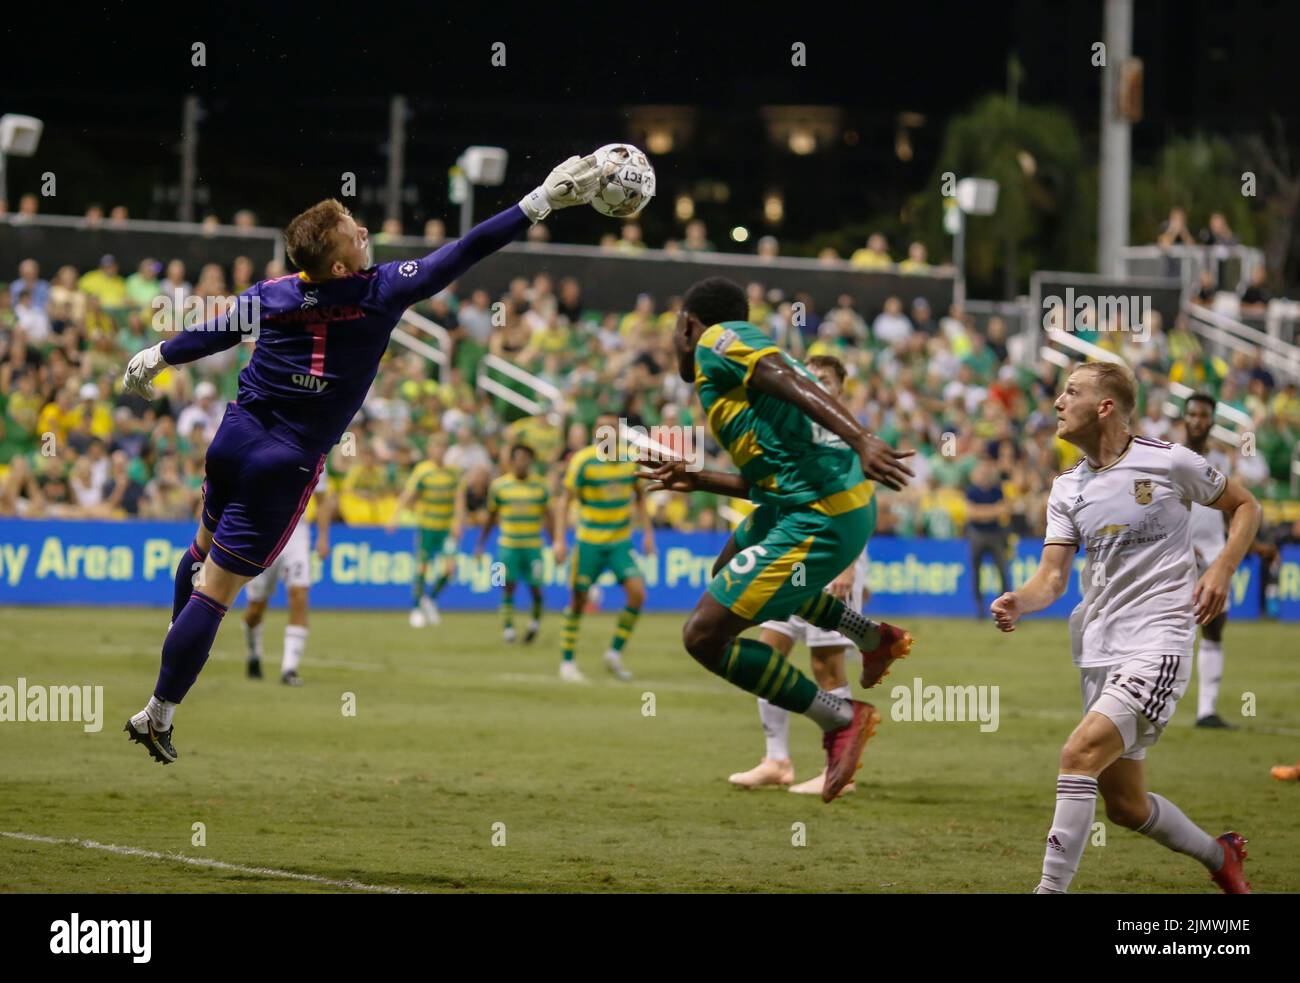 St. Petersburg, FL: Detroit City goalkeeper Nate Steinwascher (1) leaps and makes a save during a USL soccer game  against the Tampa Bay Rowdies, Satu Stock Photo